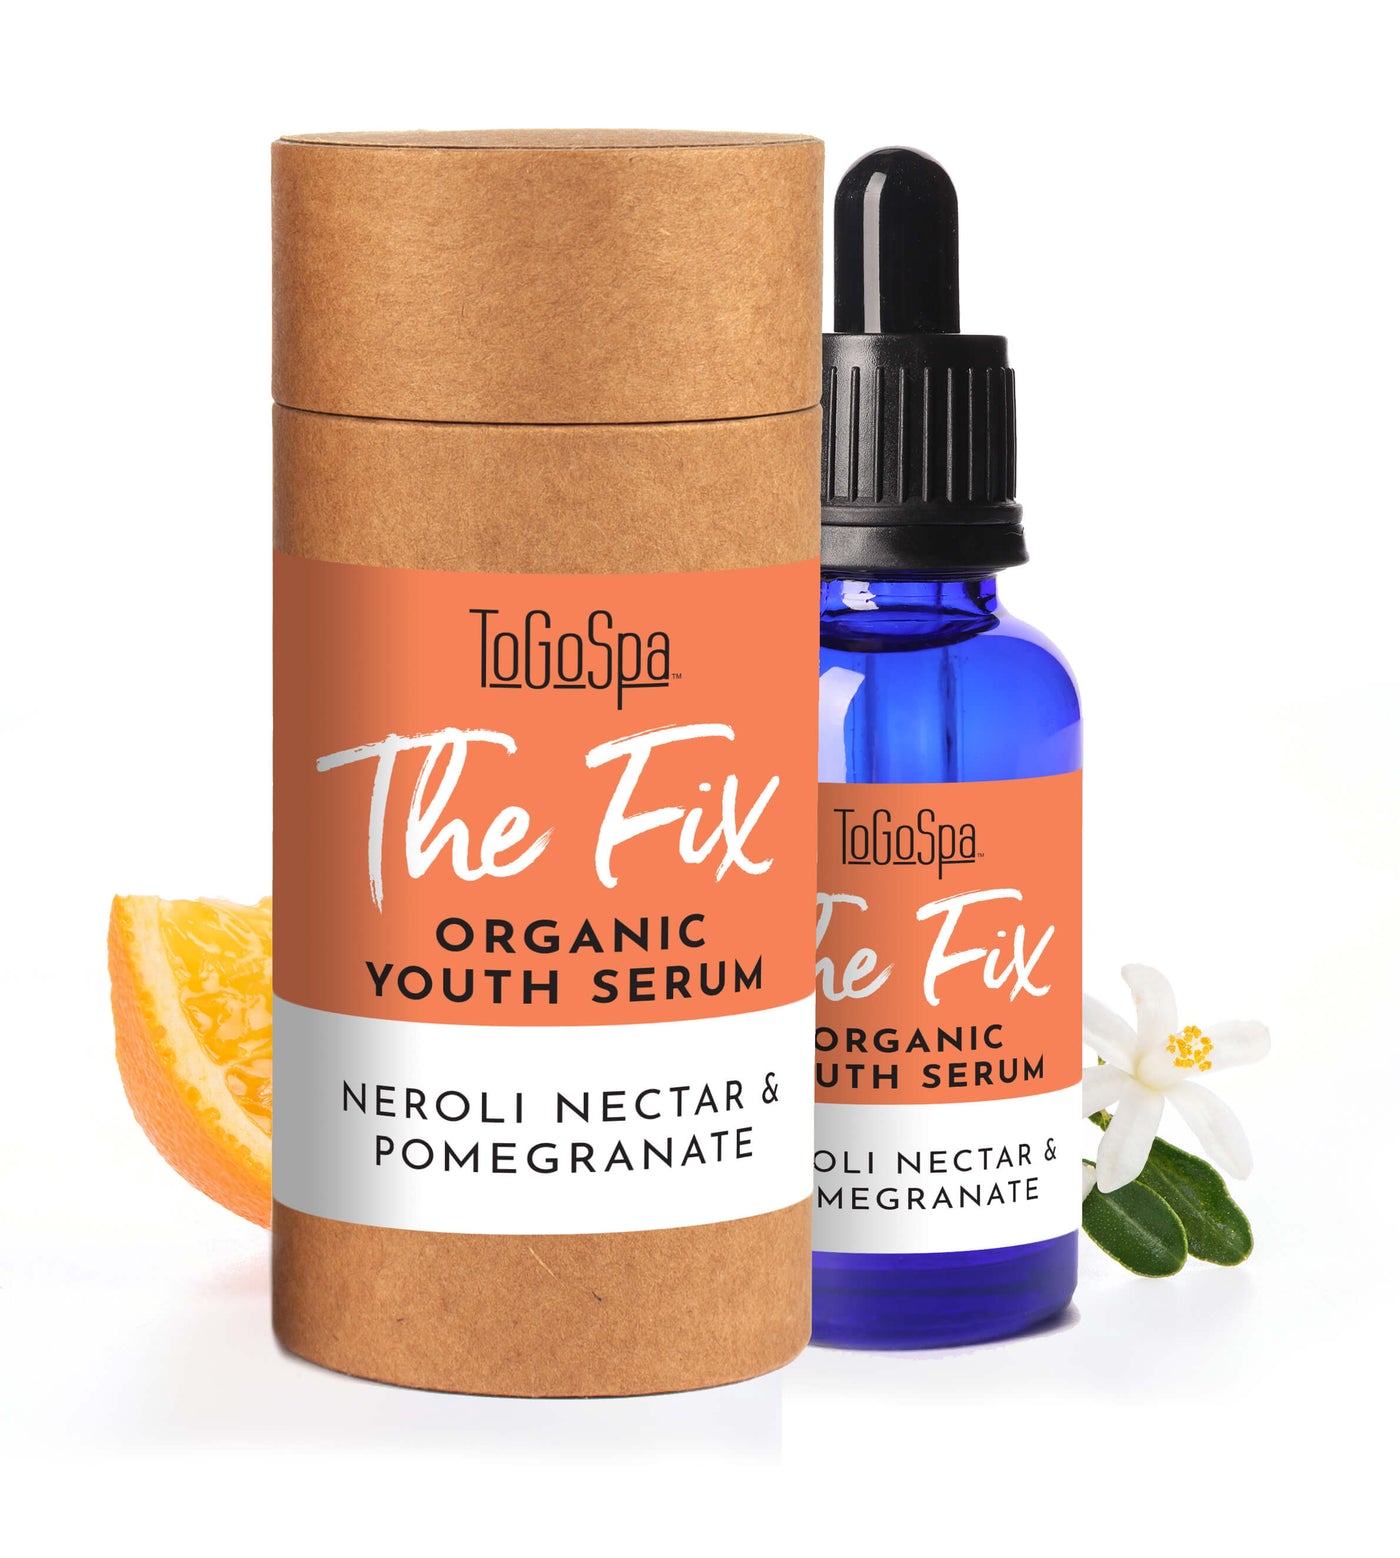 The Fix: AKA The Fountain of Youth Serum